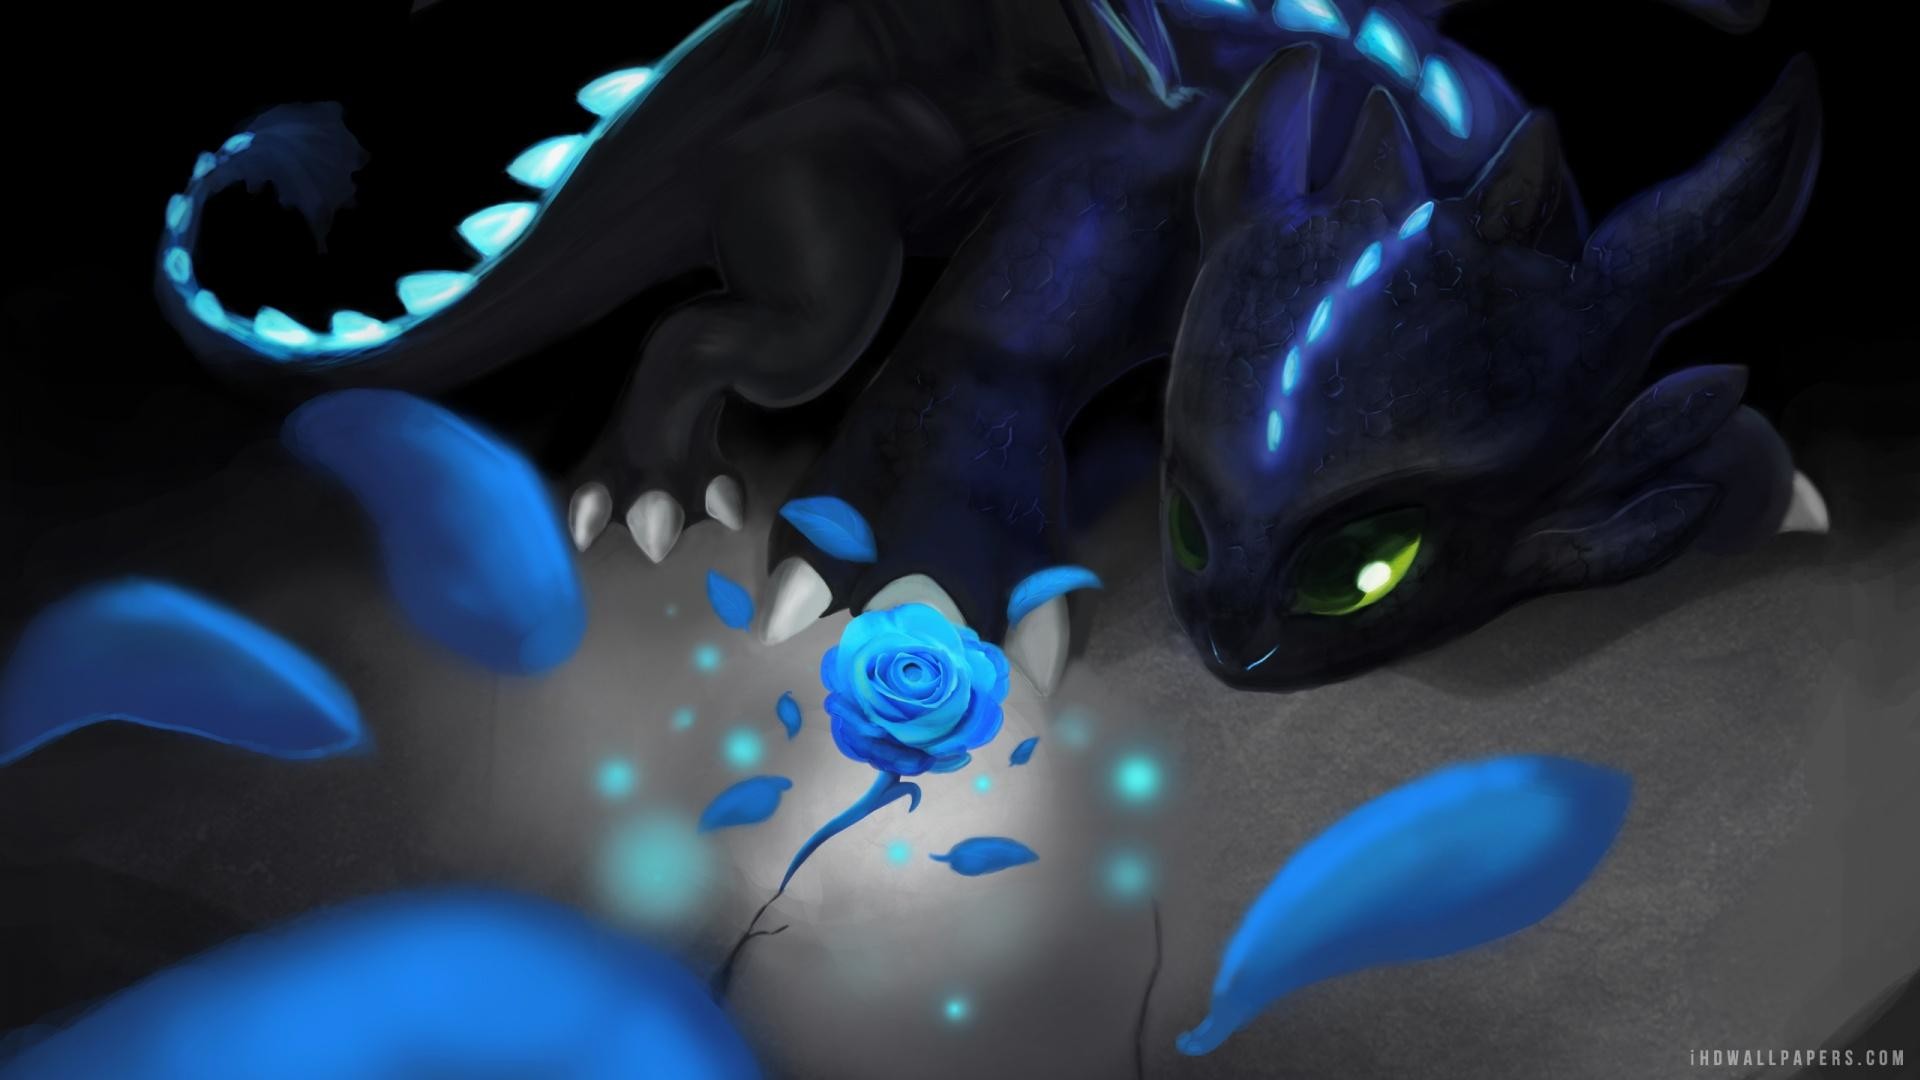 1920x1080 Best images about Toothless Dragon Wallpaper Dr Toothless Wallpaper Phone  by WallpaperGallery on DeviantArt 